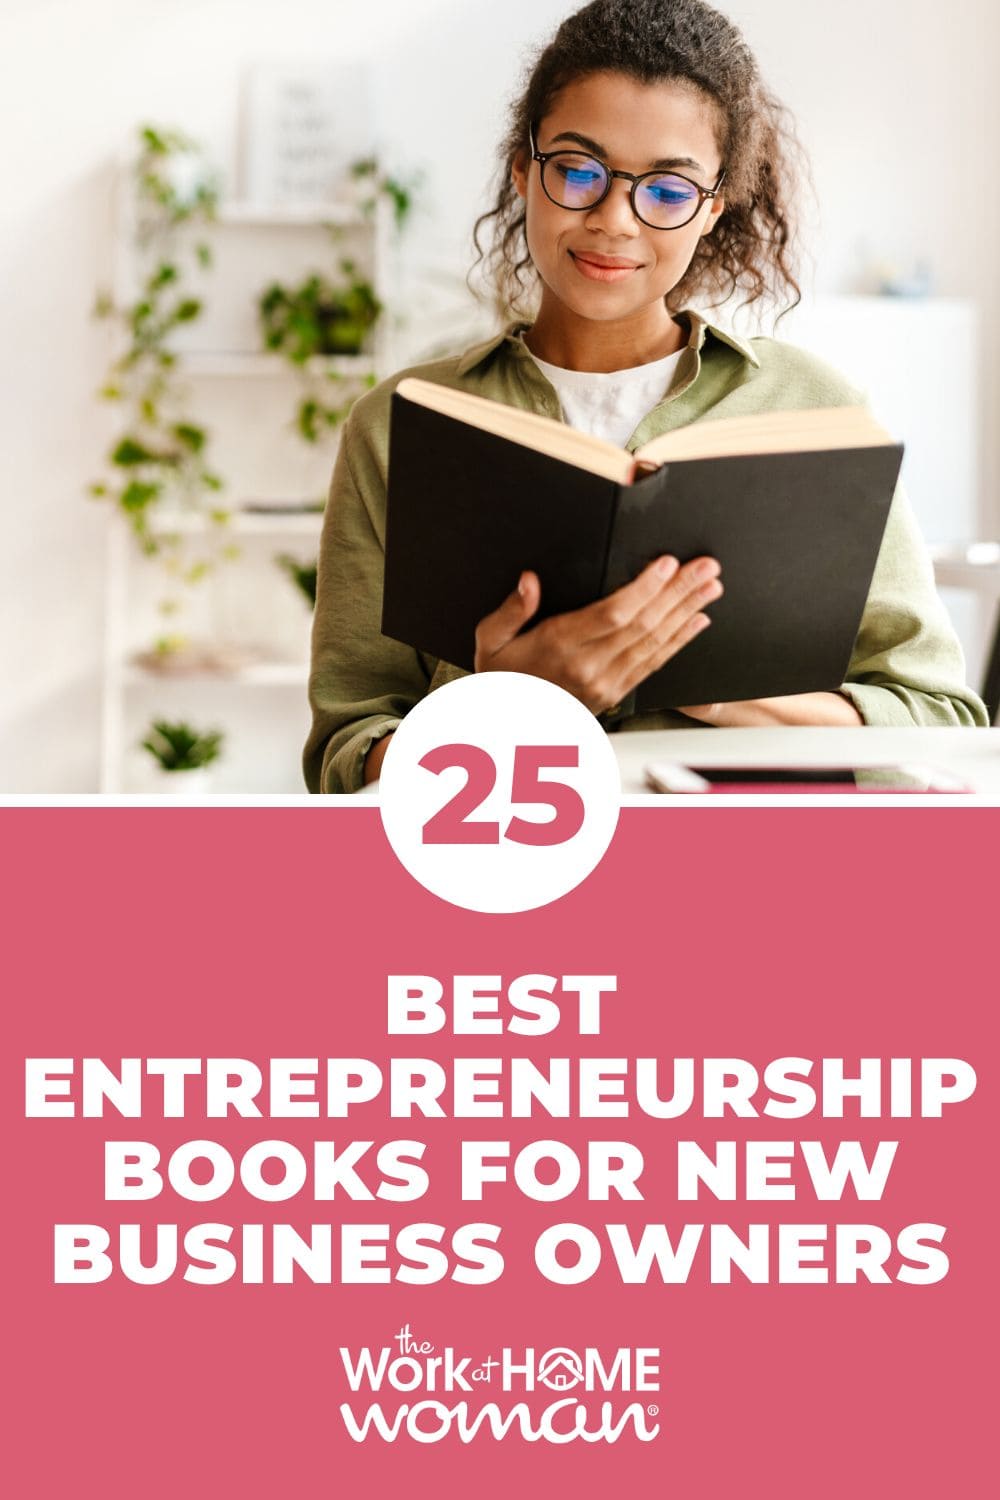 Are you looking for business books that can take your business to the next level? Here are 25 top-notch entrepreneurship books for beginners!